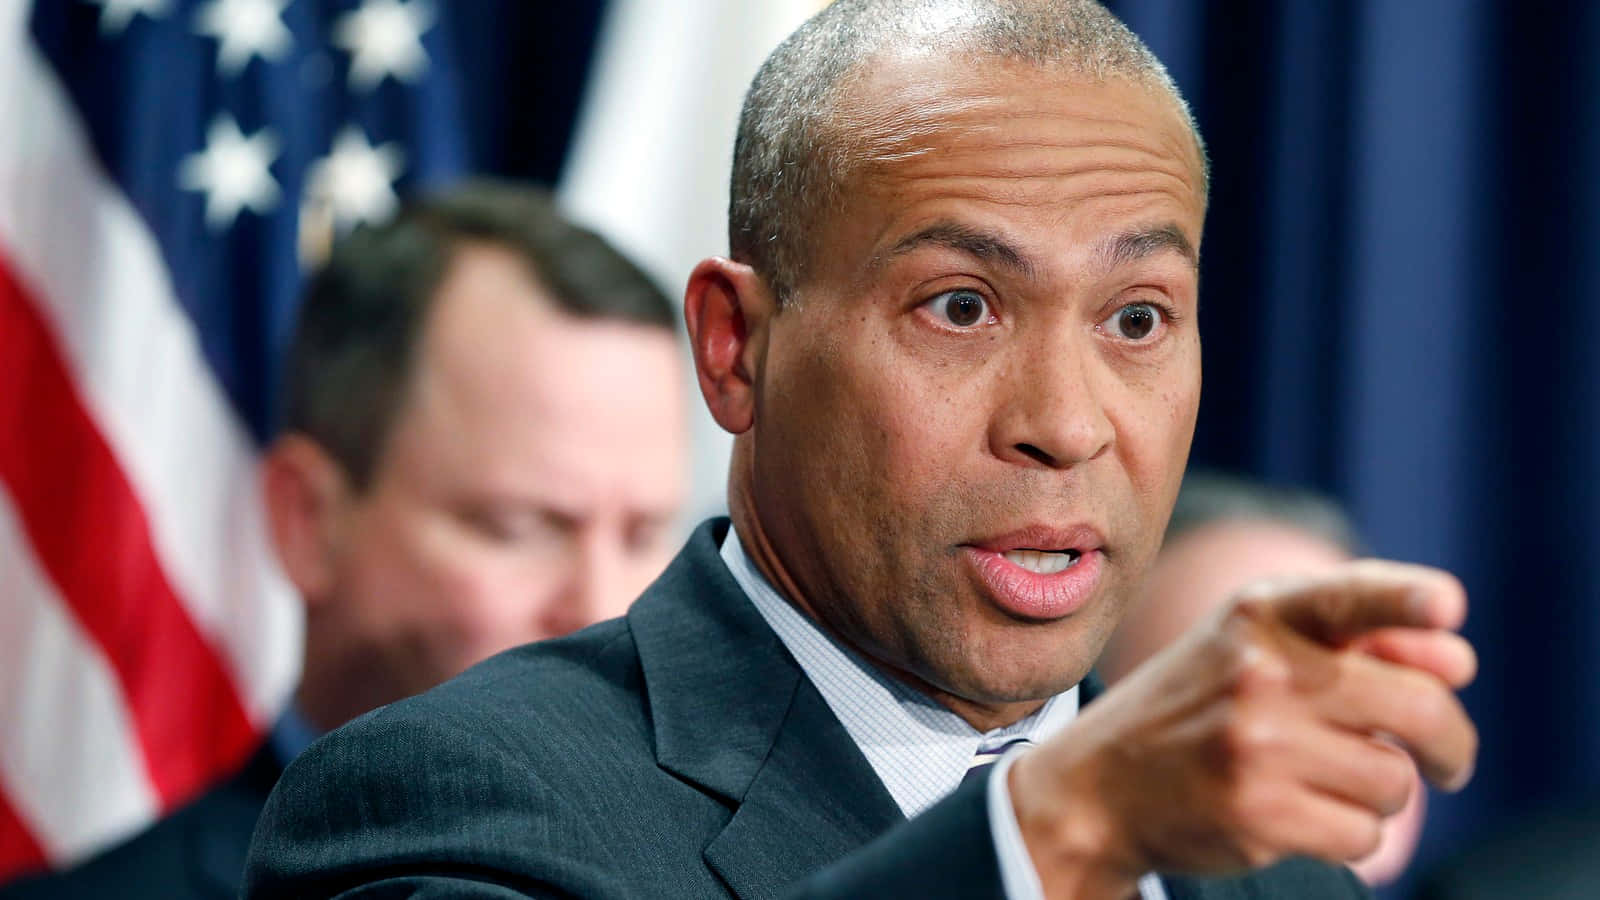 Deval Patrick Engaged in Discussion Wallpaper